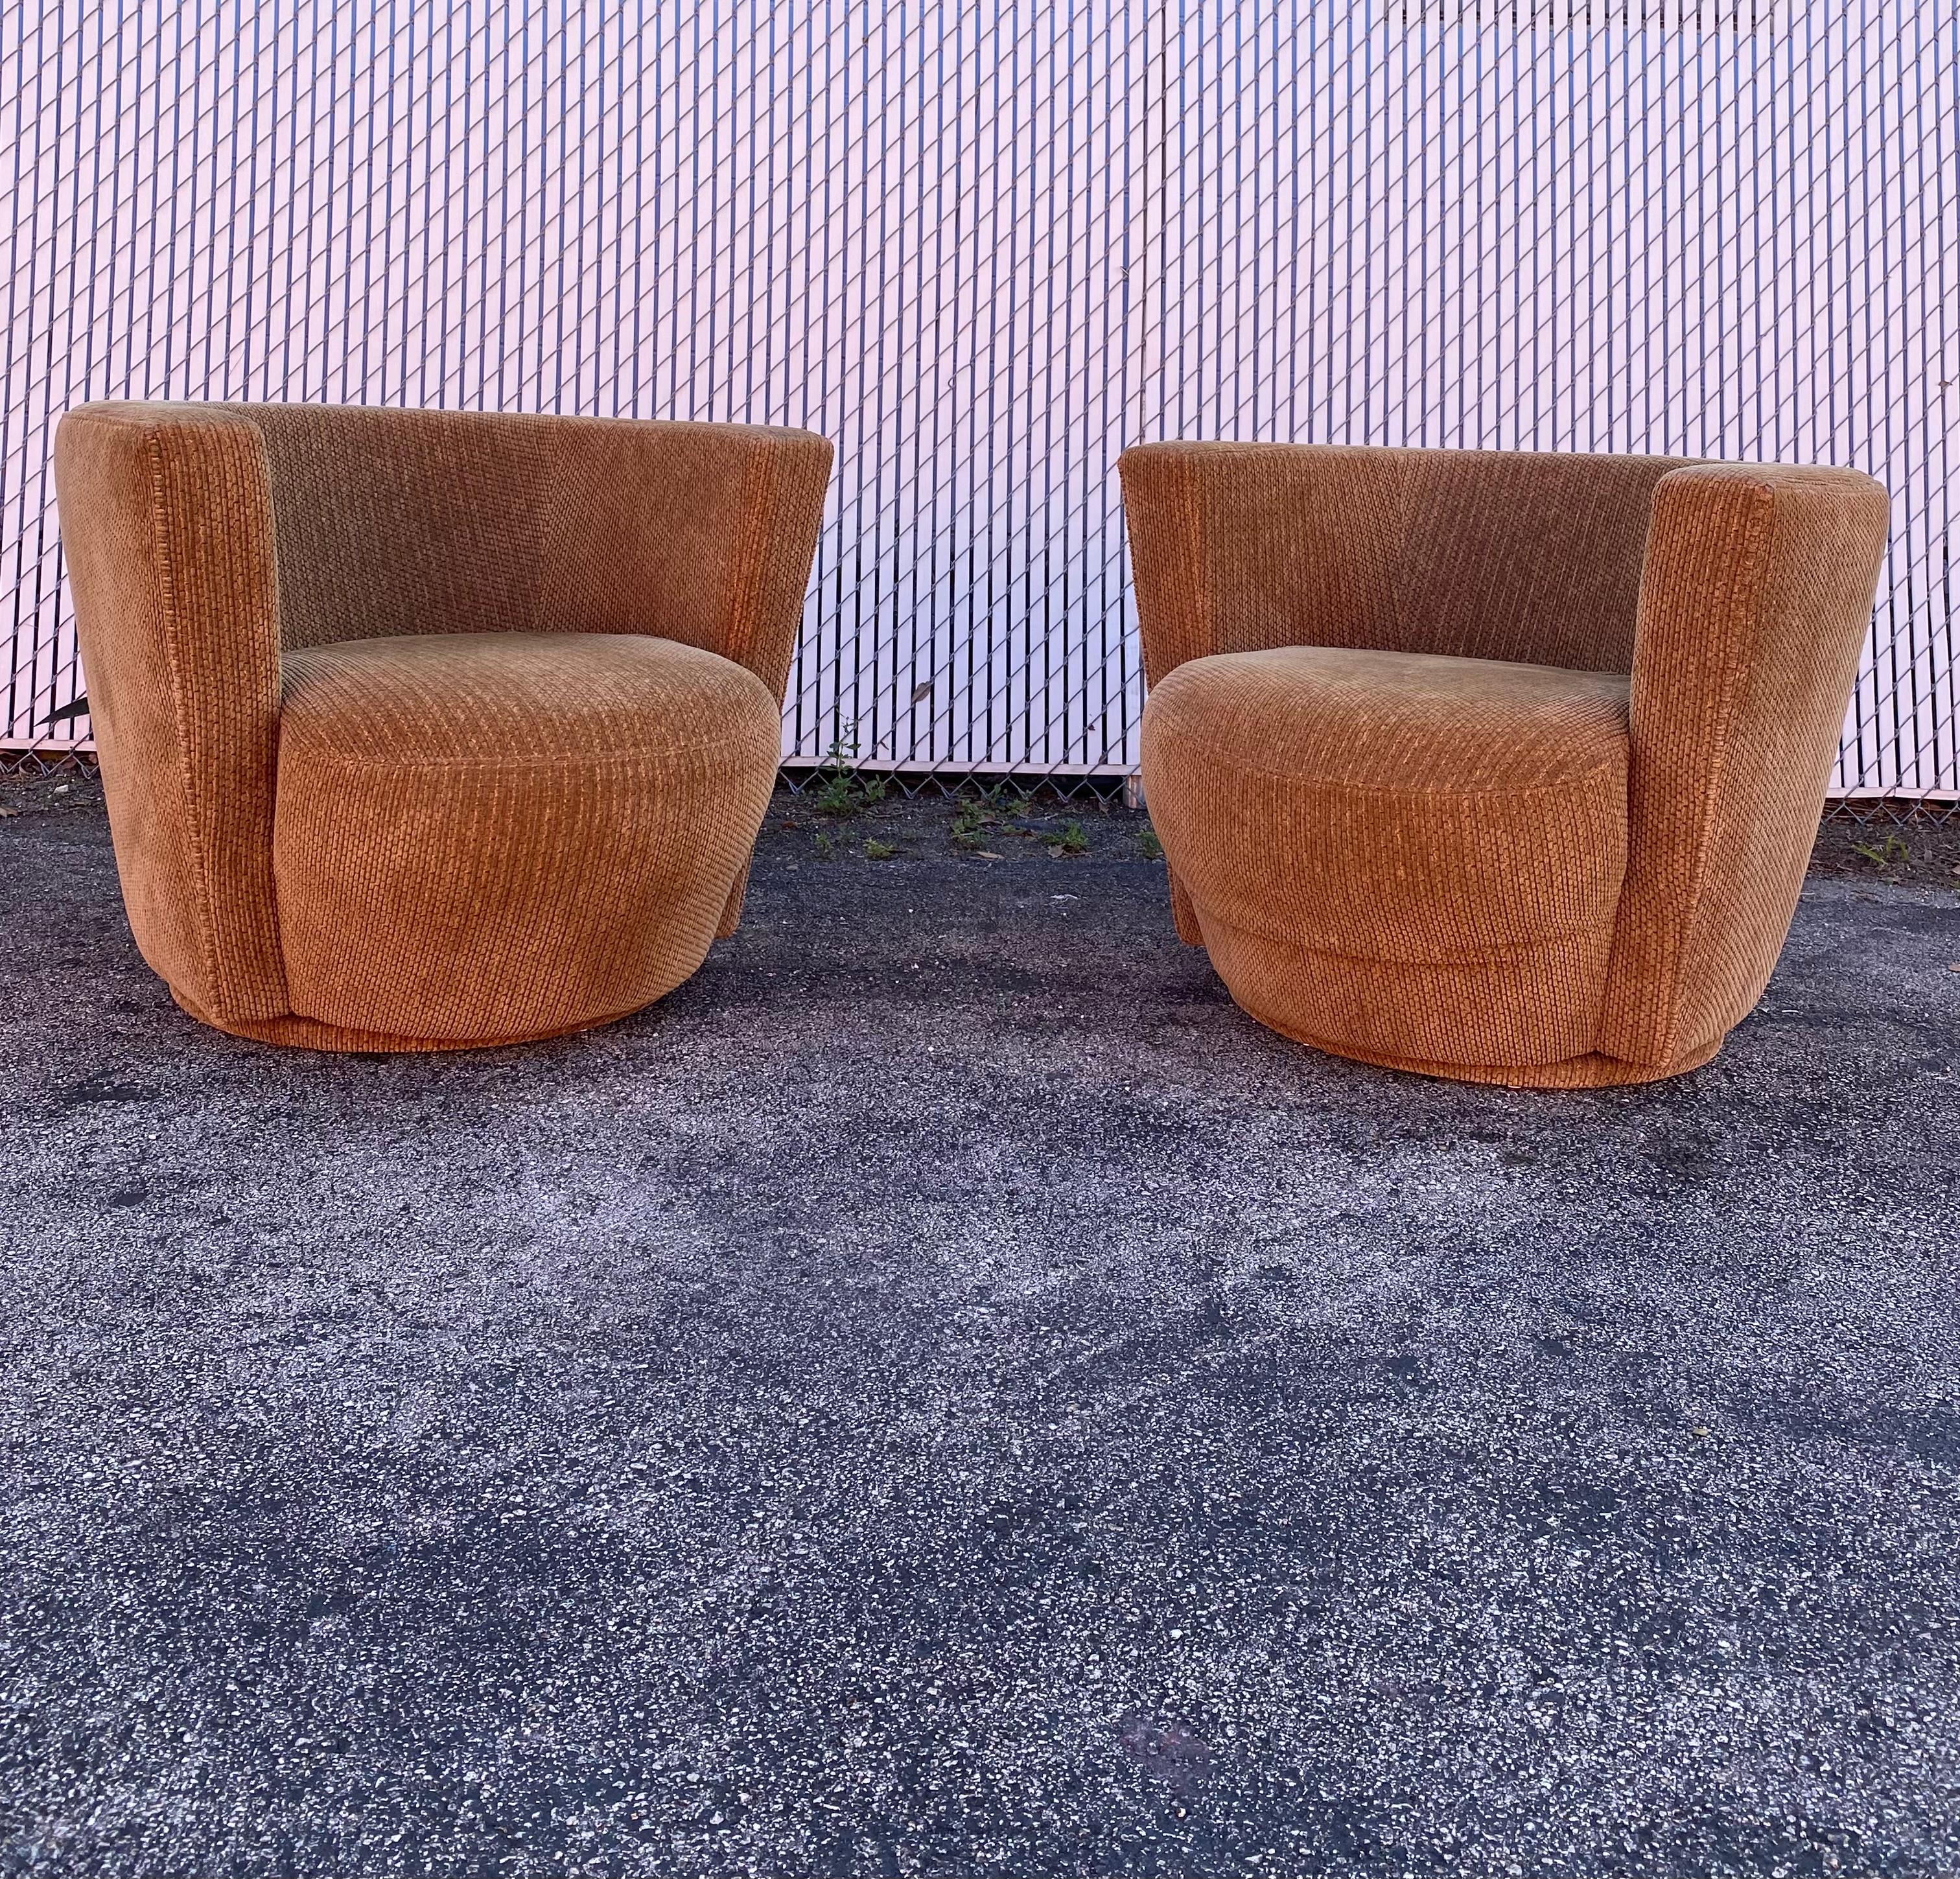 These iconic stylish original upholstered swivel chairs are packed with personality! Outstanding design is exhibited throughout the monumental form. Their beautiful and unique shape are designed by Ransom Culler. The chairs feature a comfortable